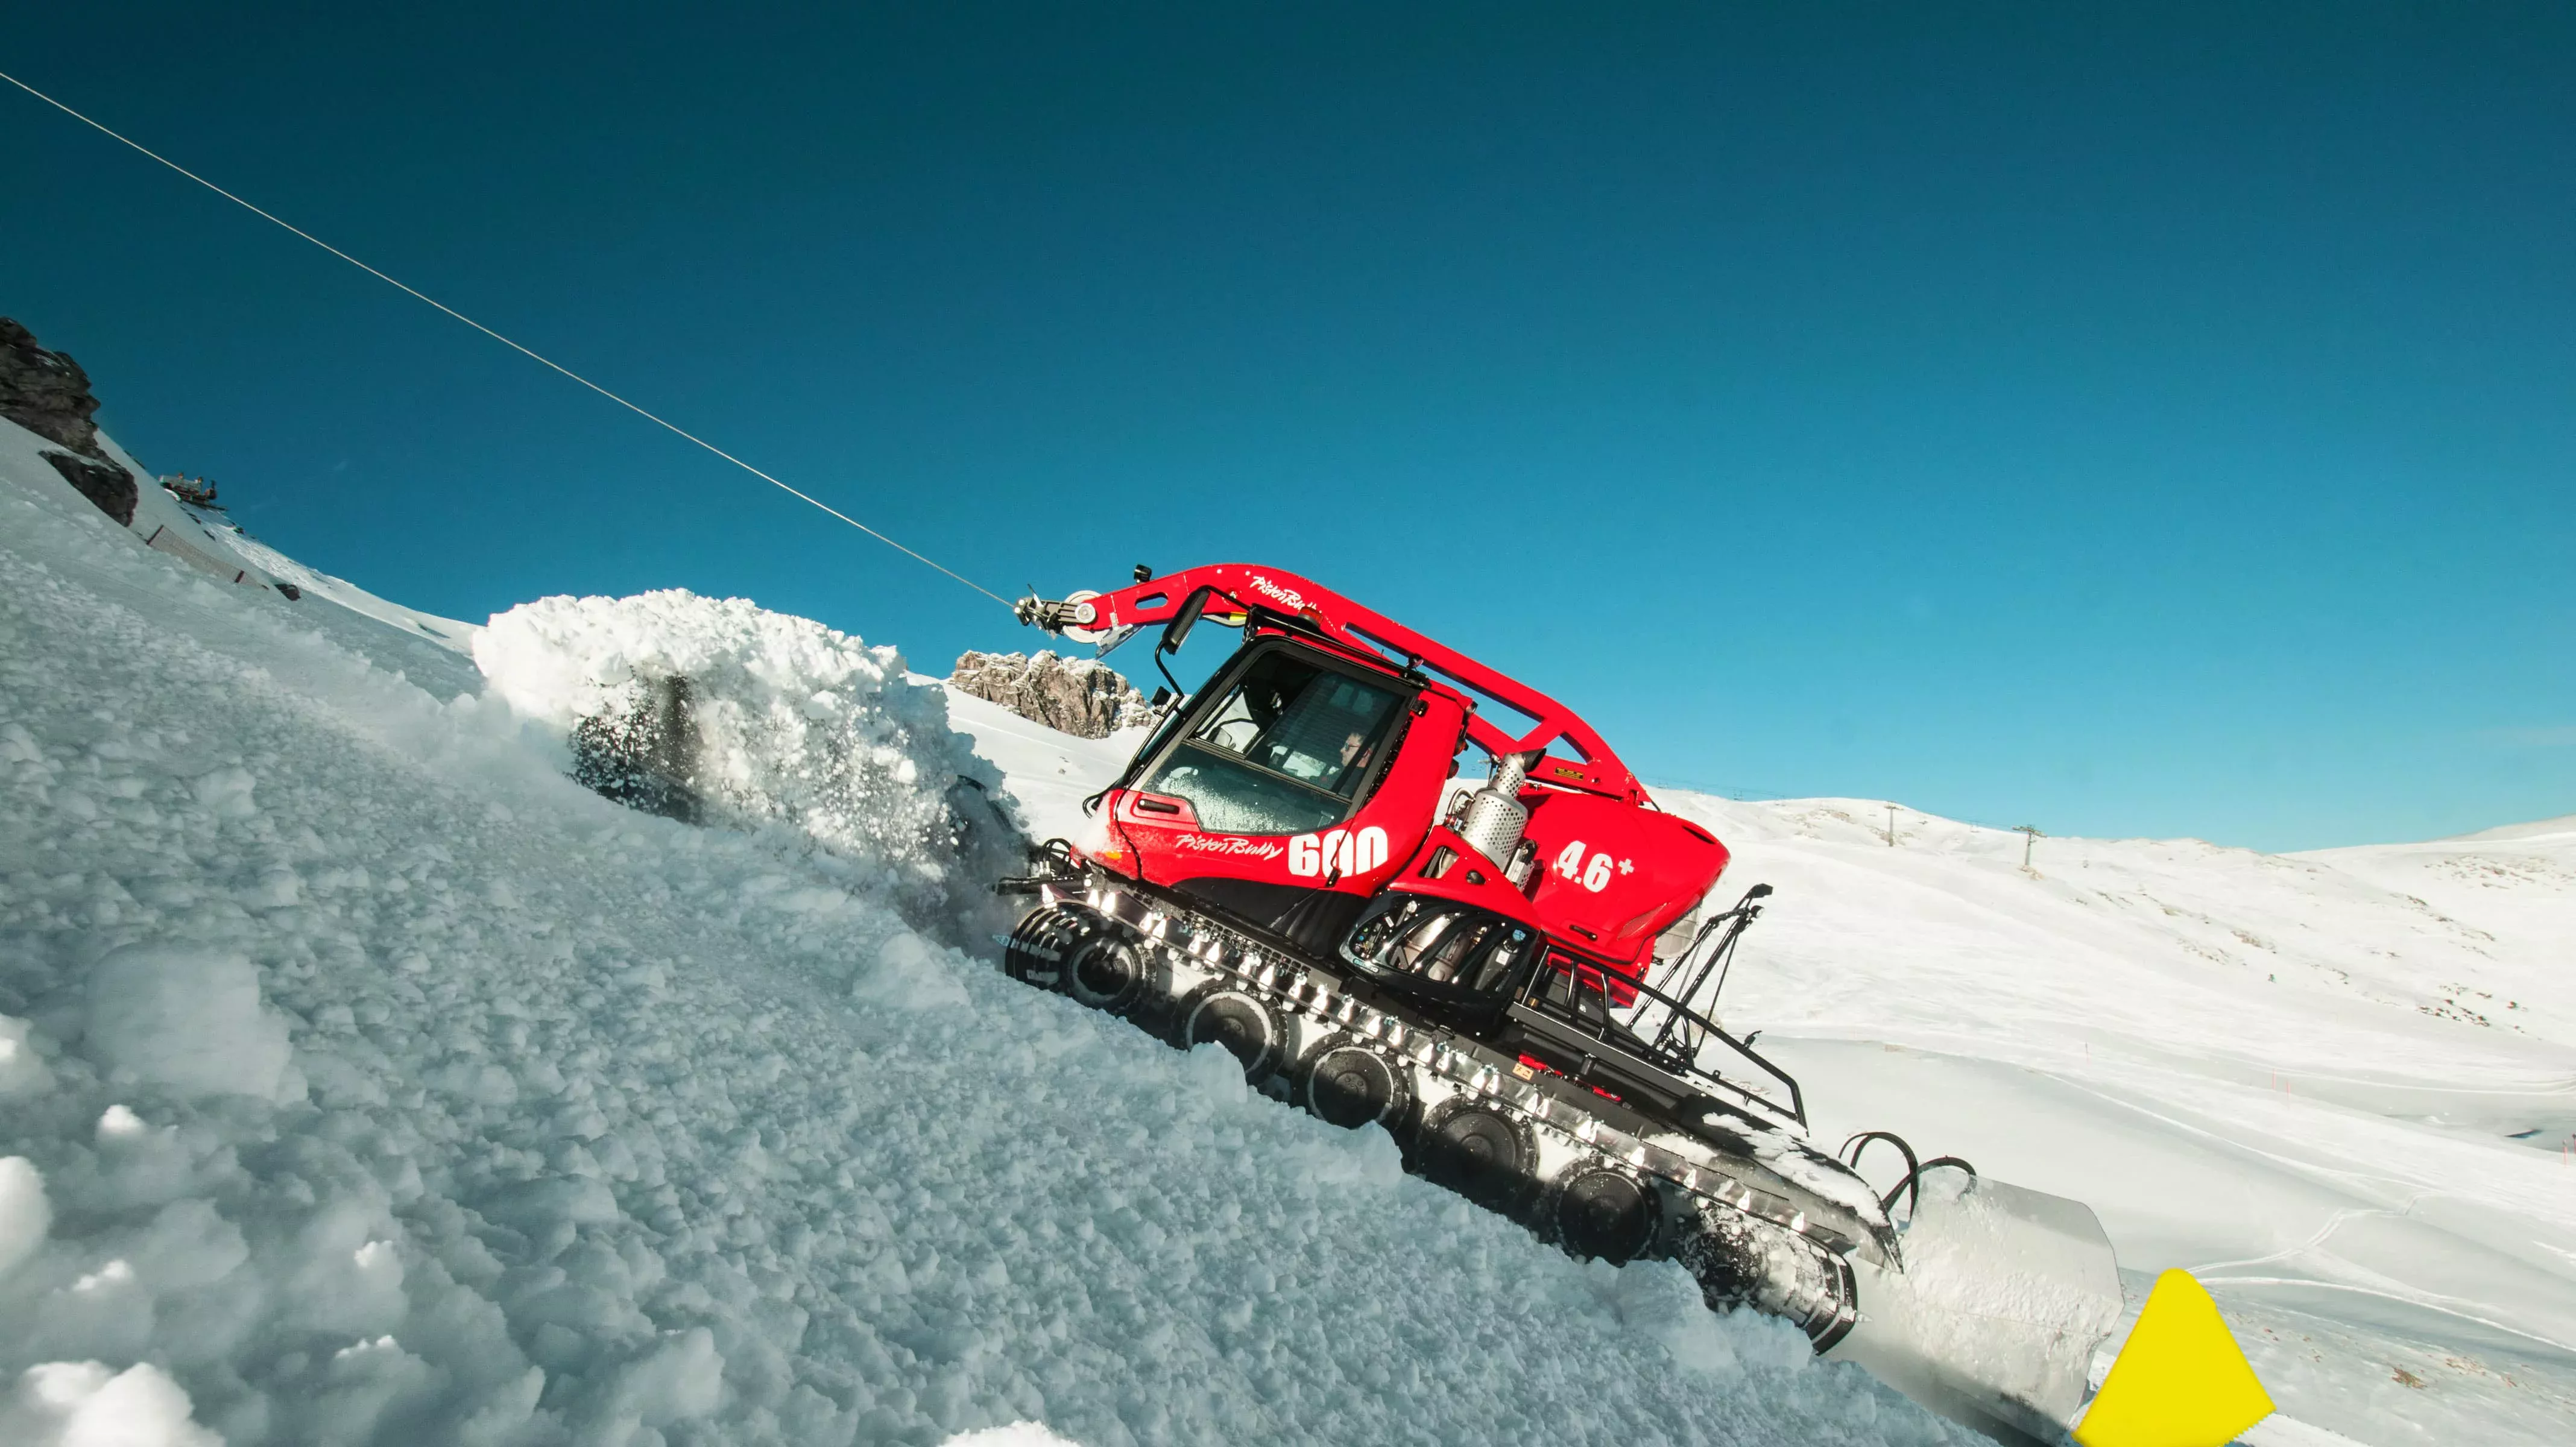 PistenBully 600 pulls itself up the mountain.